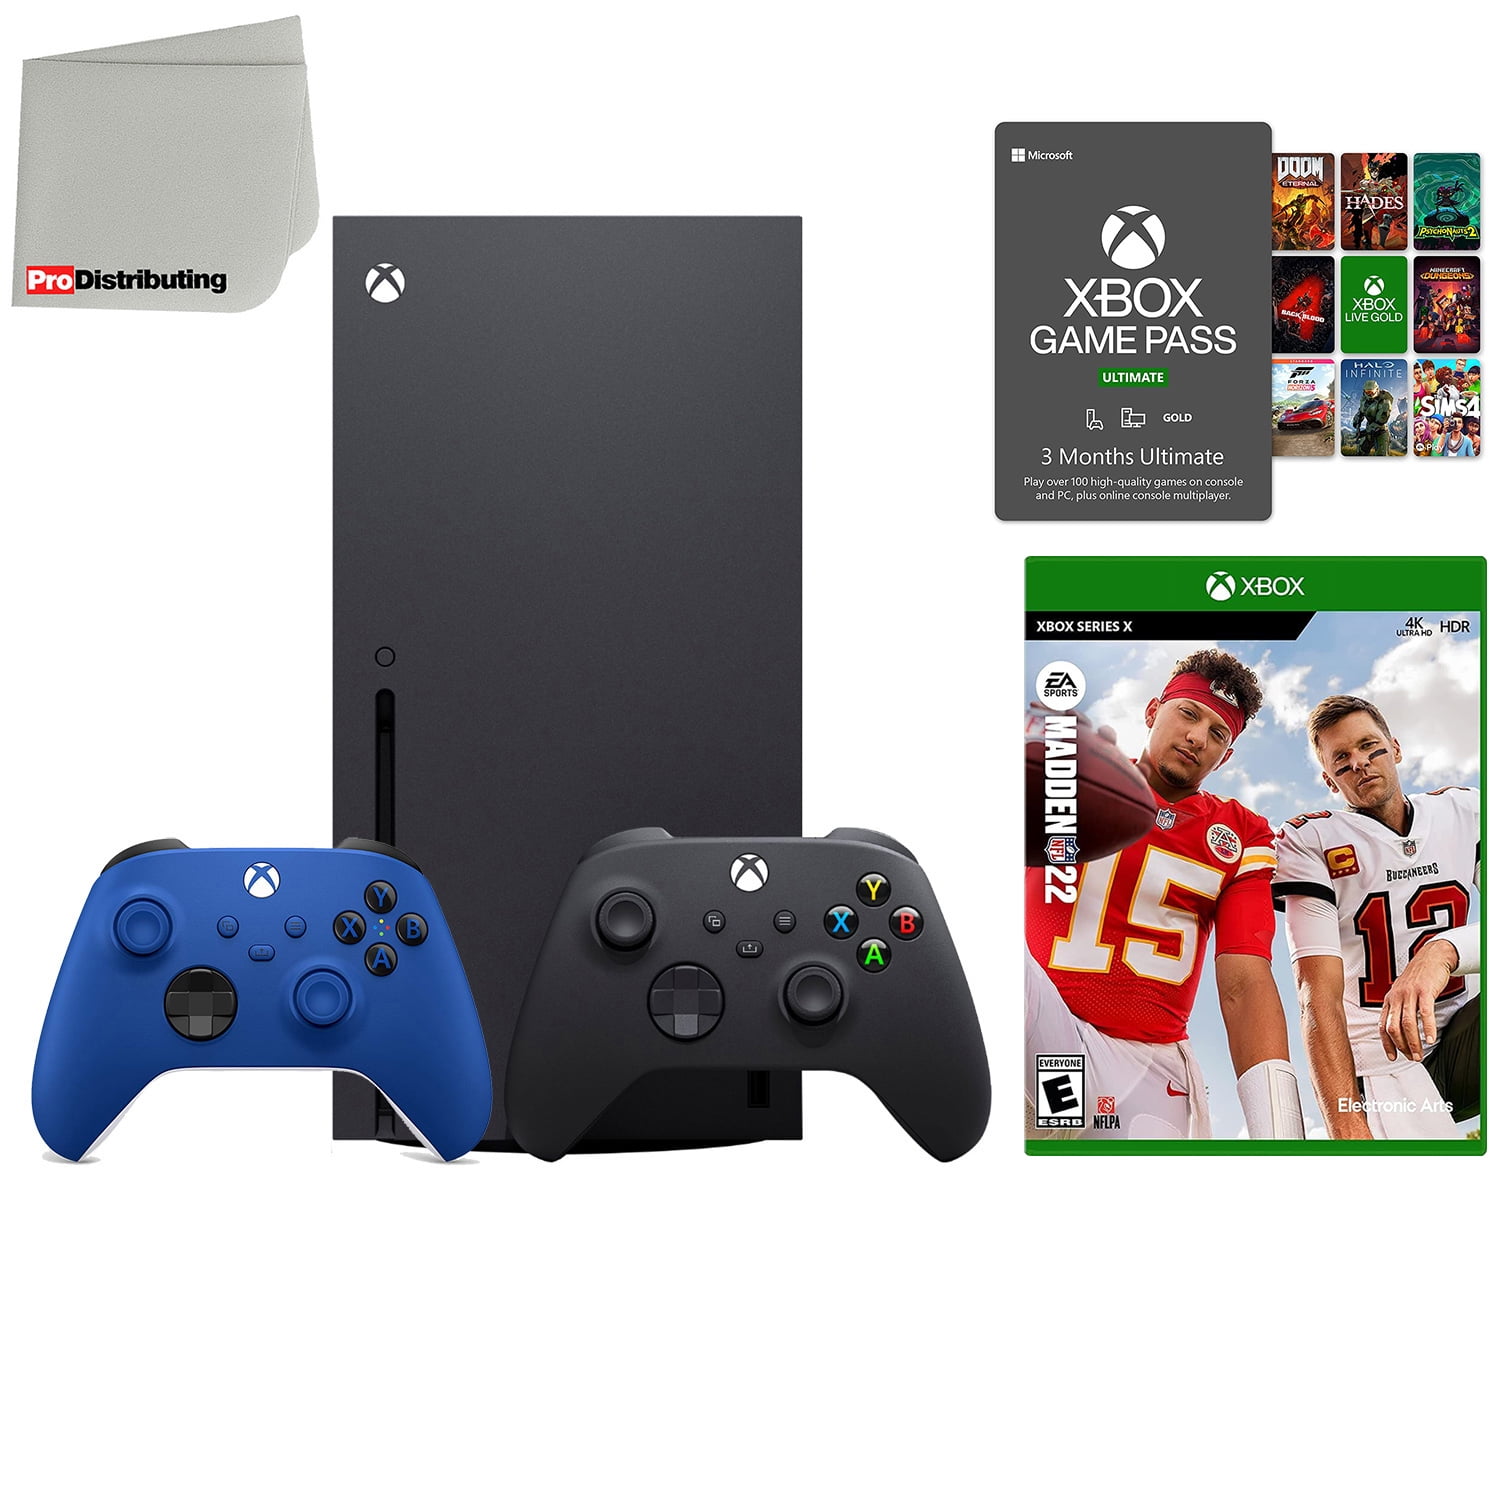 Microsoft Xbox Series X 1TB Video Game Console with Extra Wireless Controller - Shock Blue - Madden NFL 22, 3-Month Game Pass Ultimate and Microfiber Cleaning Cloth